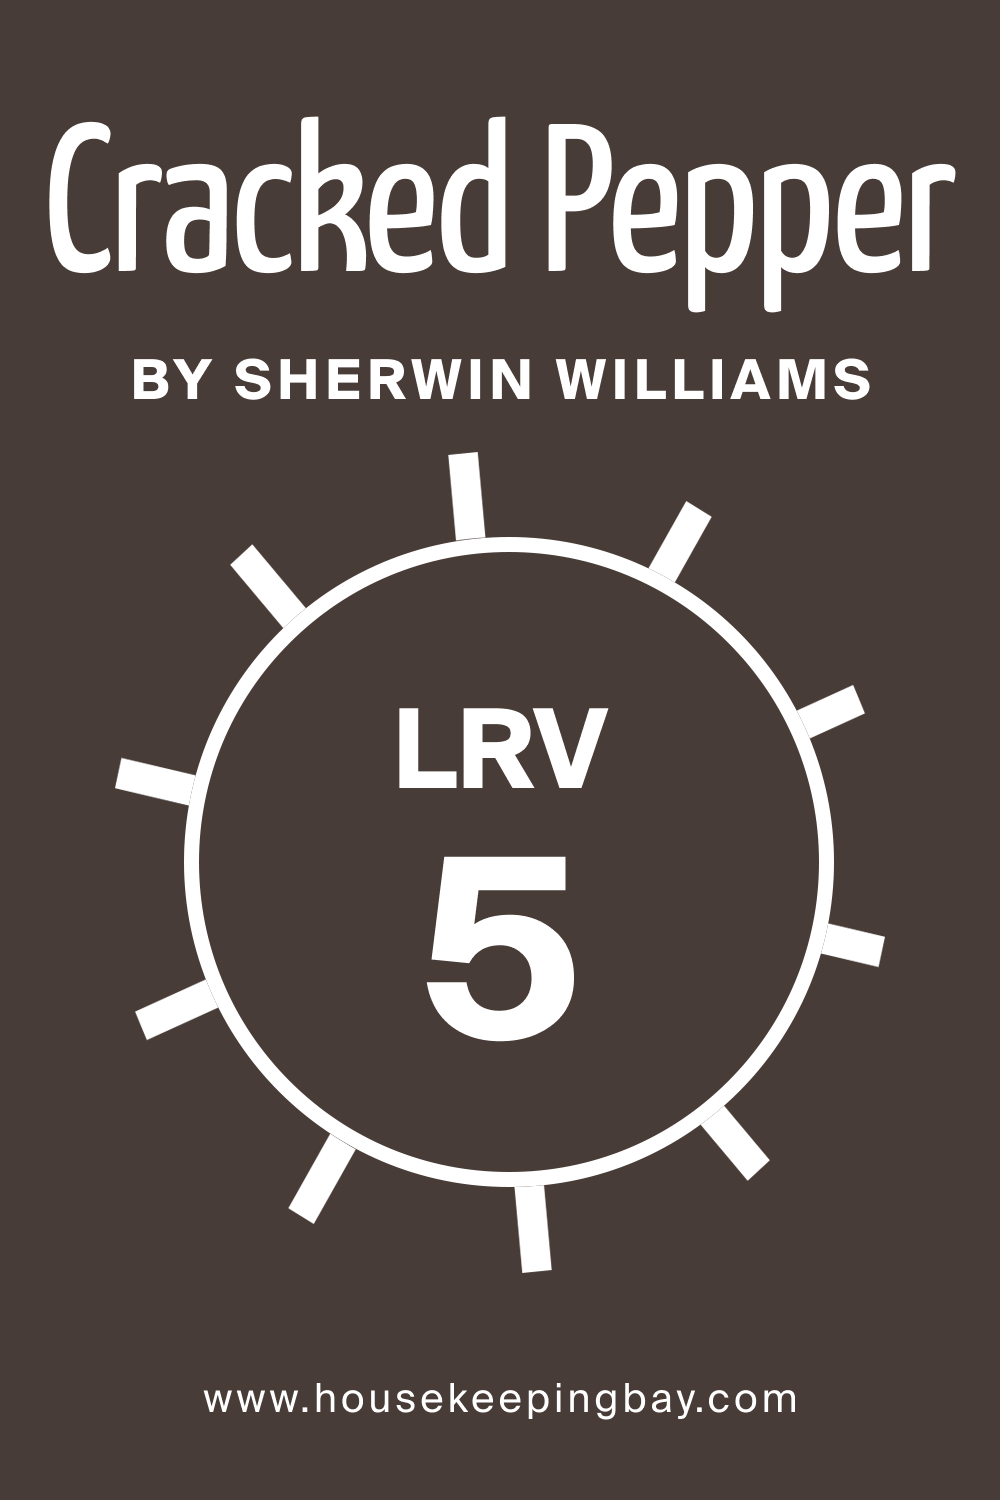 SW 9580 Cracked Pepper by Sherwin Williams. LRV 5